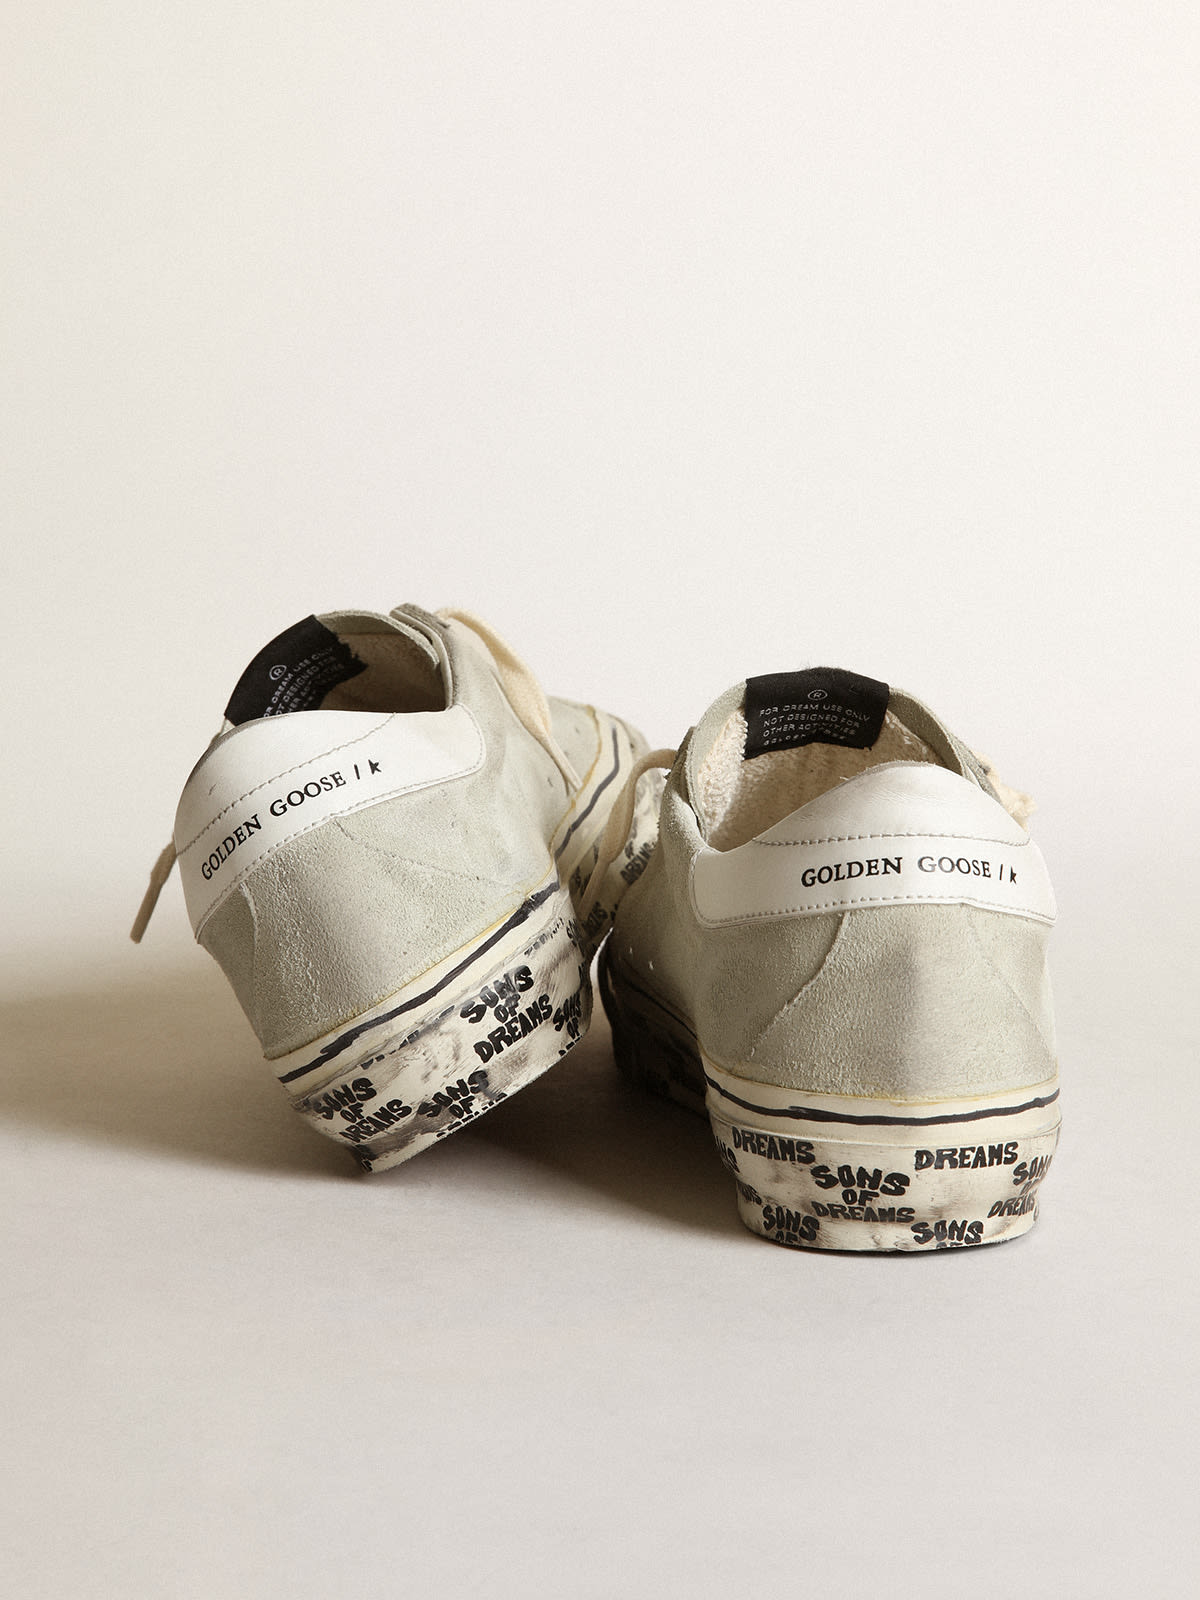 Golden Goose - Super-Star sneakers in ice-gray suede with white leather star and heel tab in 